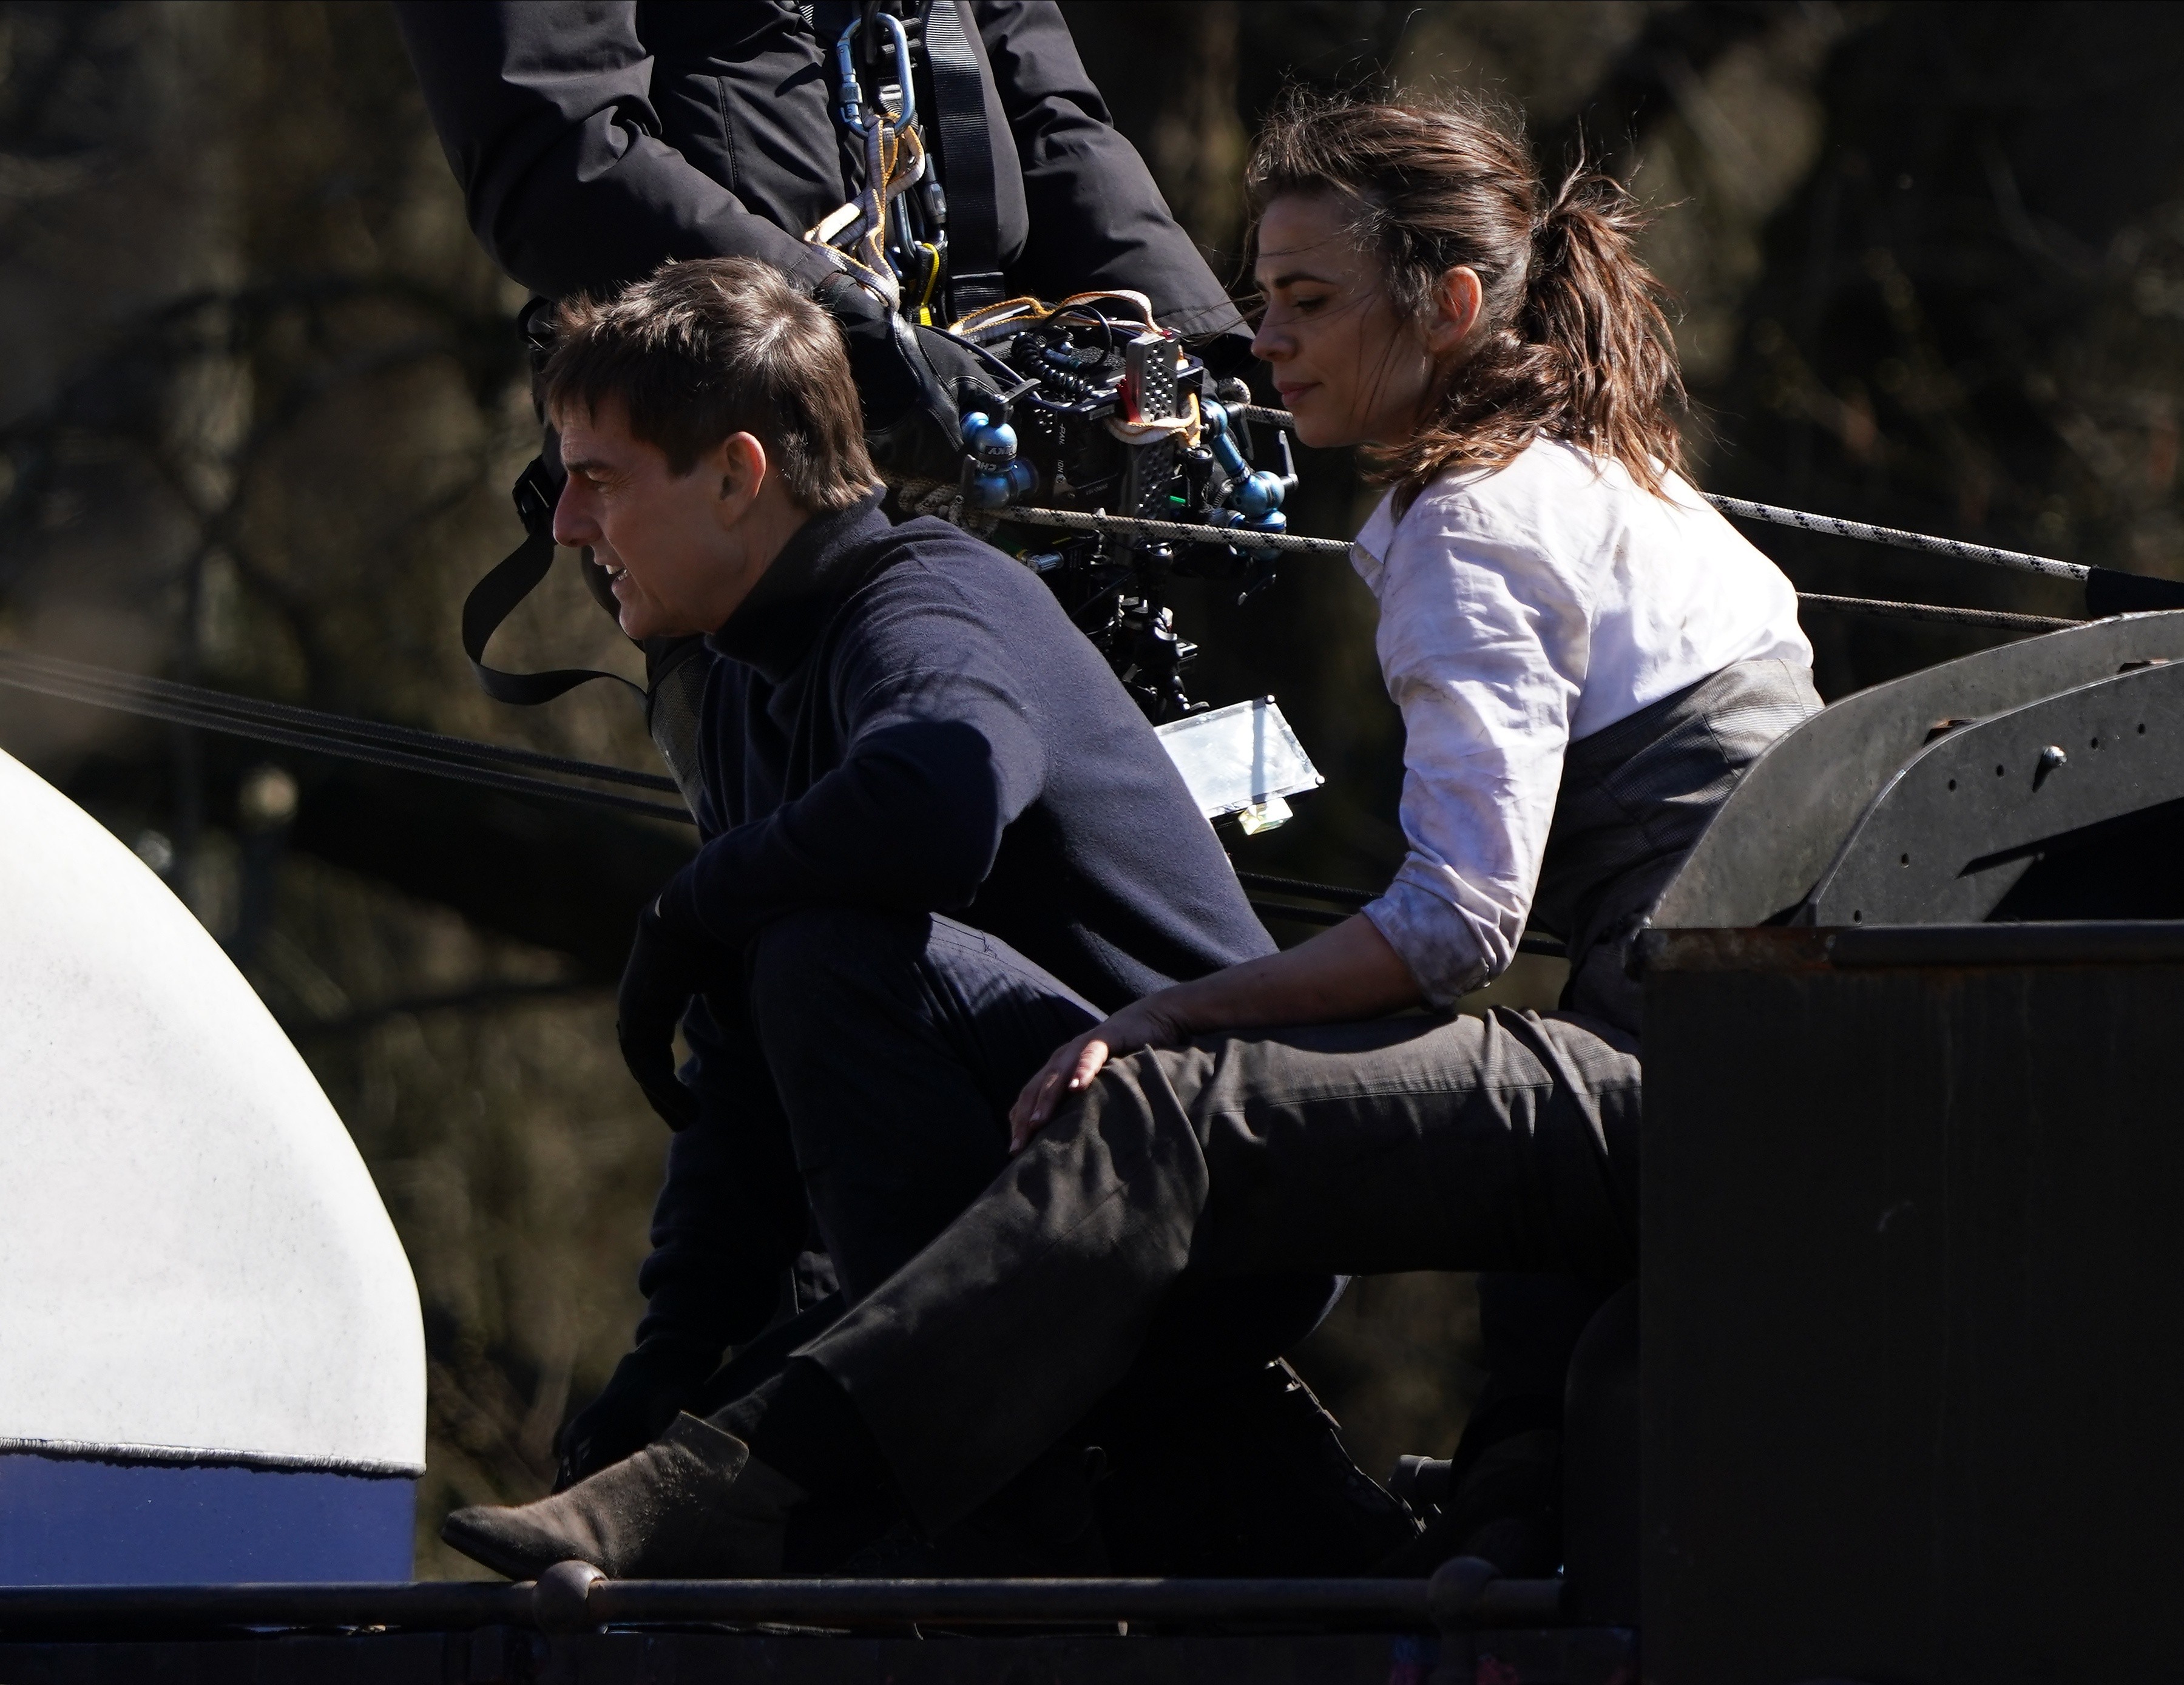 Photo © 2021 Mega/The Grosby GroupTom Cruise and Hayley Atwell seen filming of new Mission impossible film in Yorkshire. 22 Apr 2021 Pictured: Tom Cruise and Hayley Atwell. (Foto: Mega/The Grosby Group)